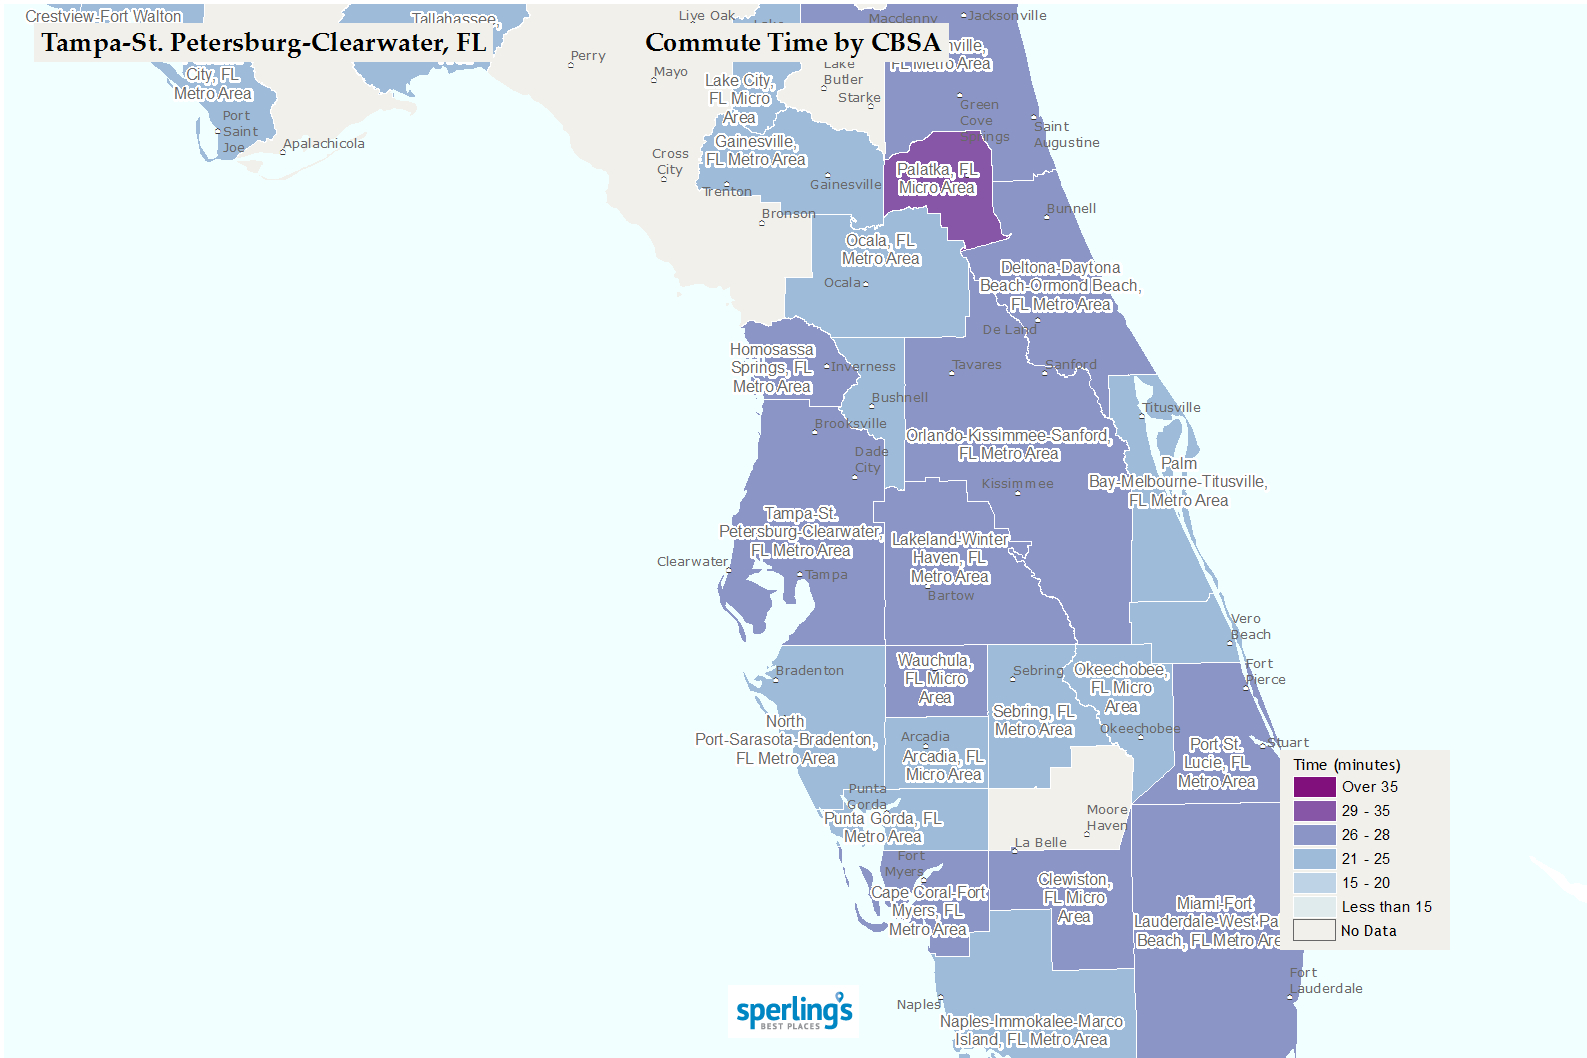 Best Places To Live | Compare Cost Of Living, Crime, Cities, Schools - Riverview Florida Map